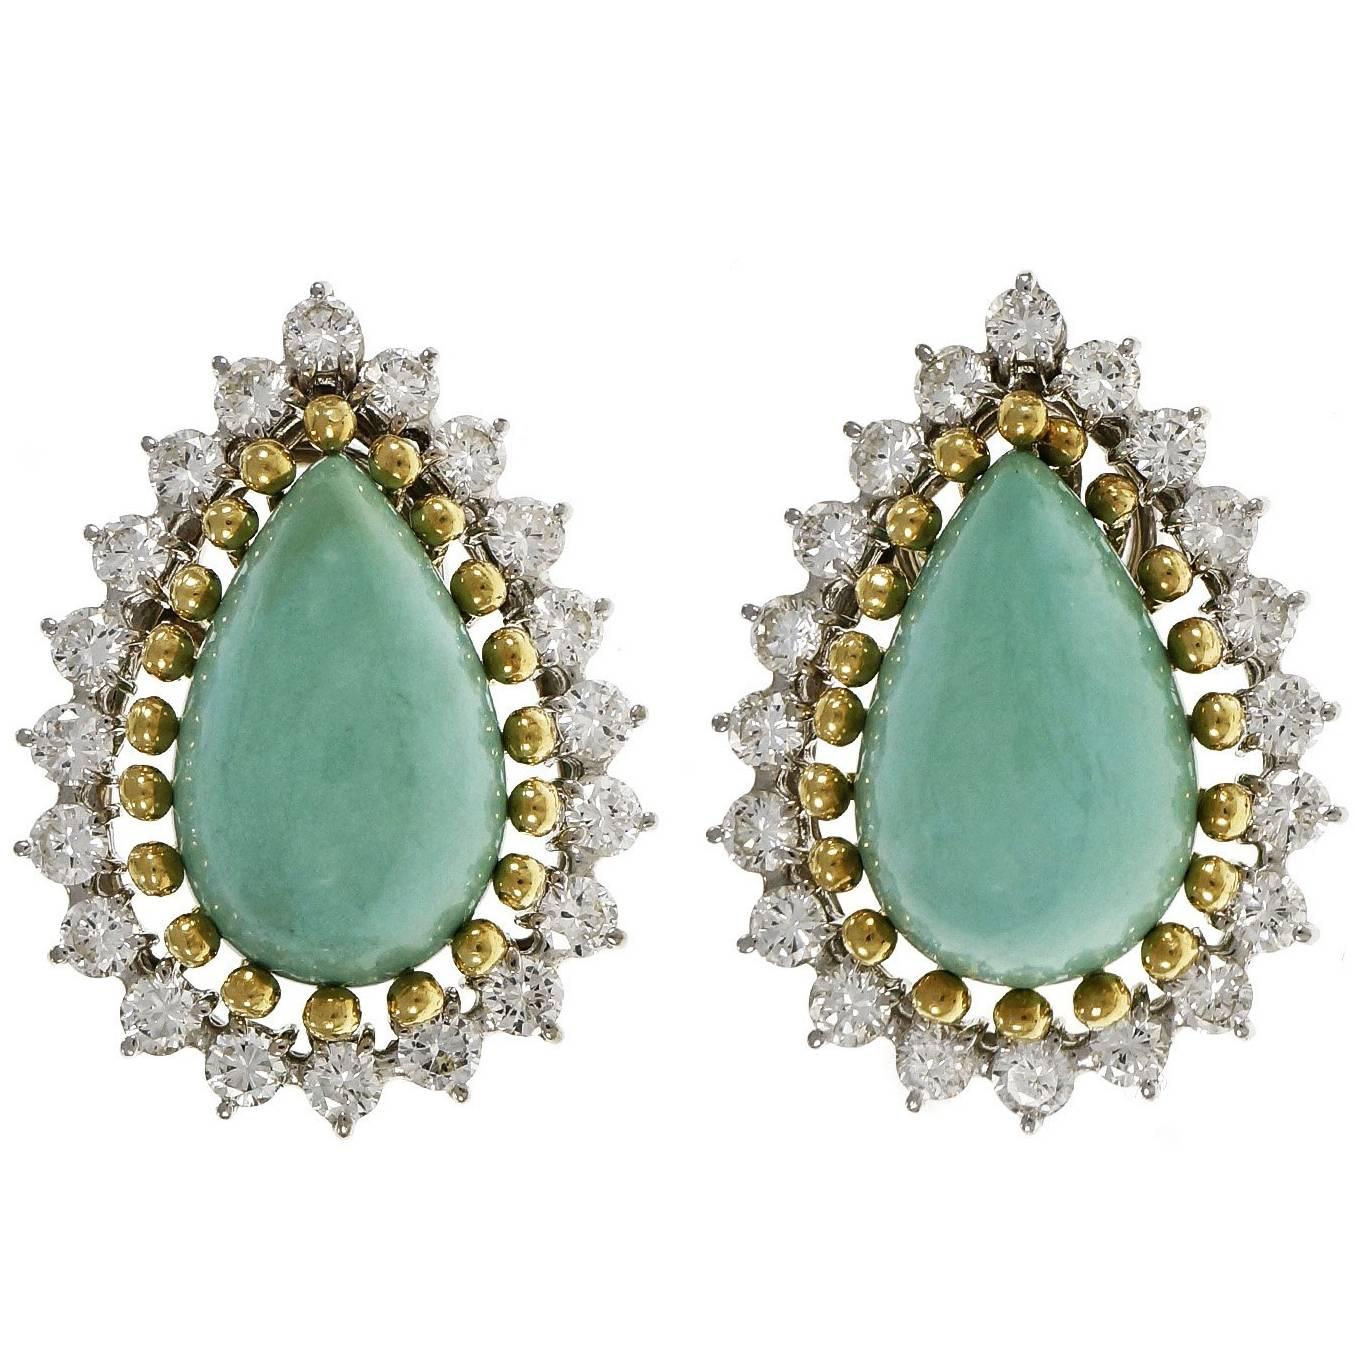 Mid-Century 1950s GIA certified natural Turquoise and diamond clip post earrings. Natural untreated Persian Turquoise surrounded by bright white full cut diamonds. Earrings are in 14k white gold with 18k yellow gold bands surrounding the